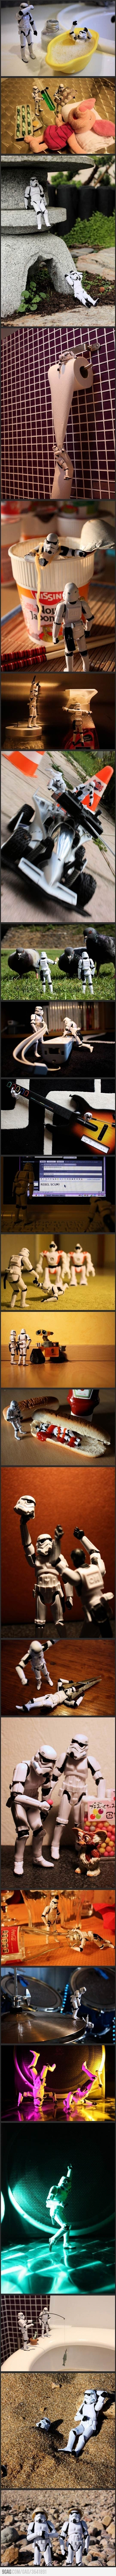 Stormtrooper – Moments of life  I would love to do this!